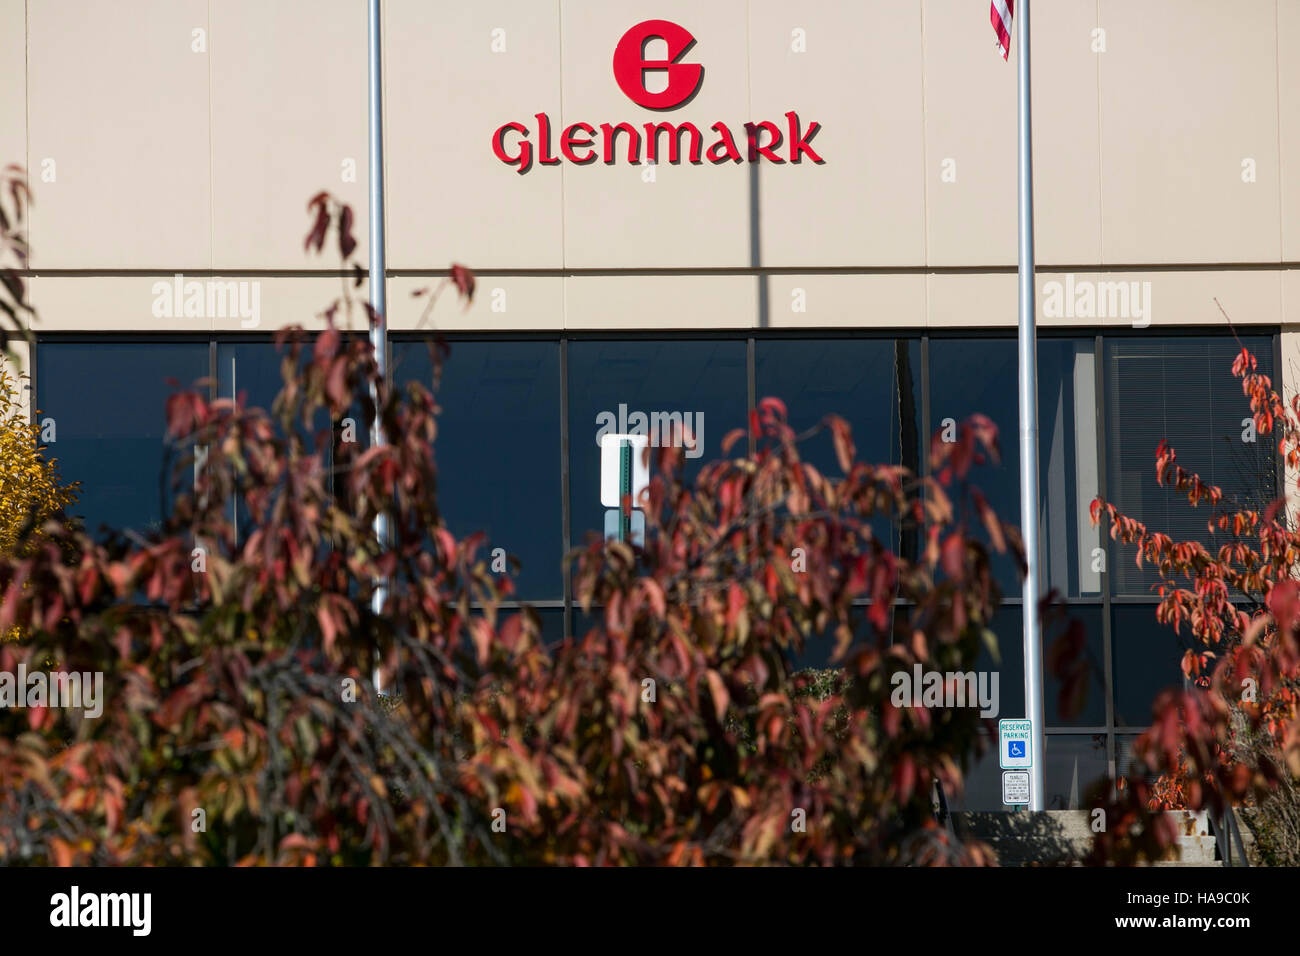 Glenmark Life Sciences IPO: Information analysis | Value Research